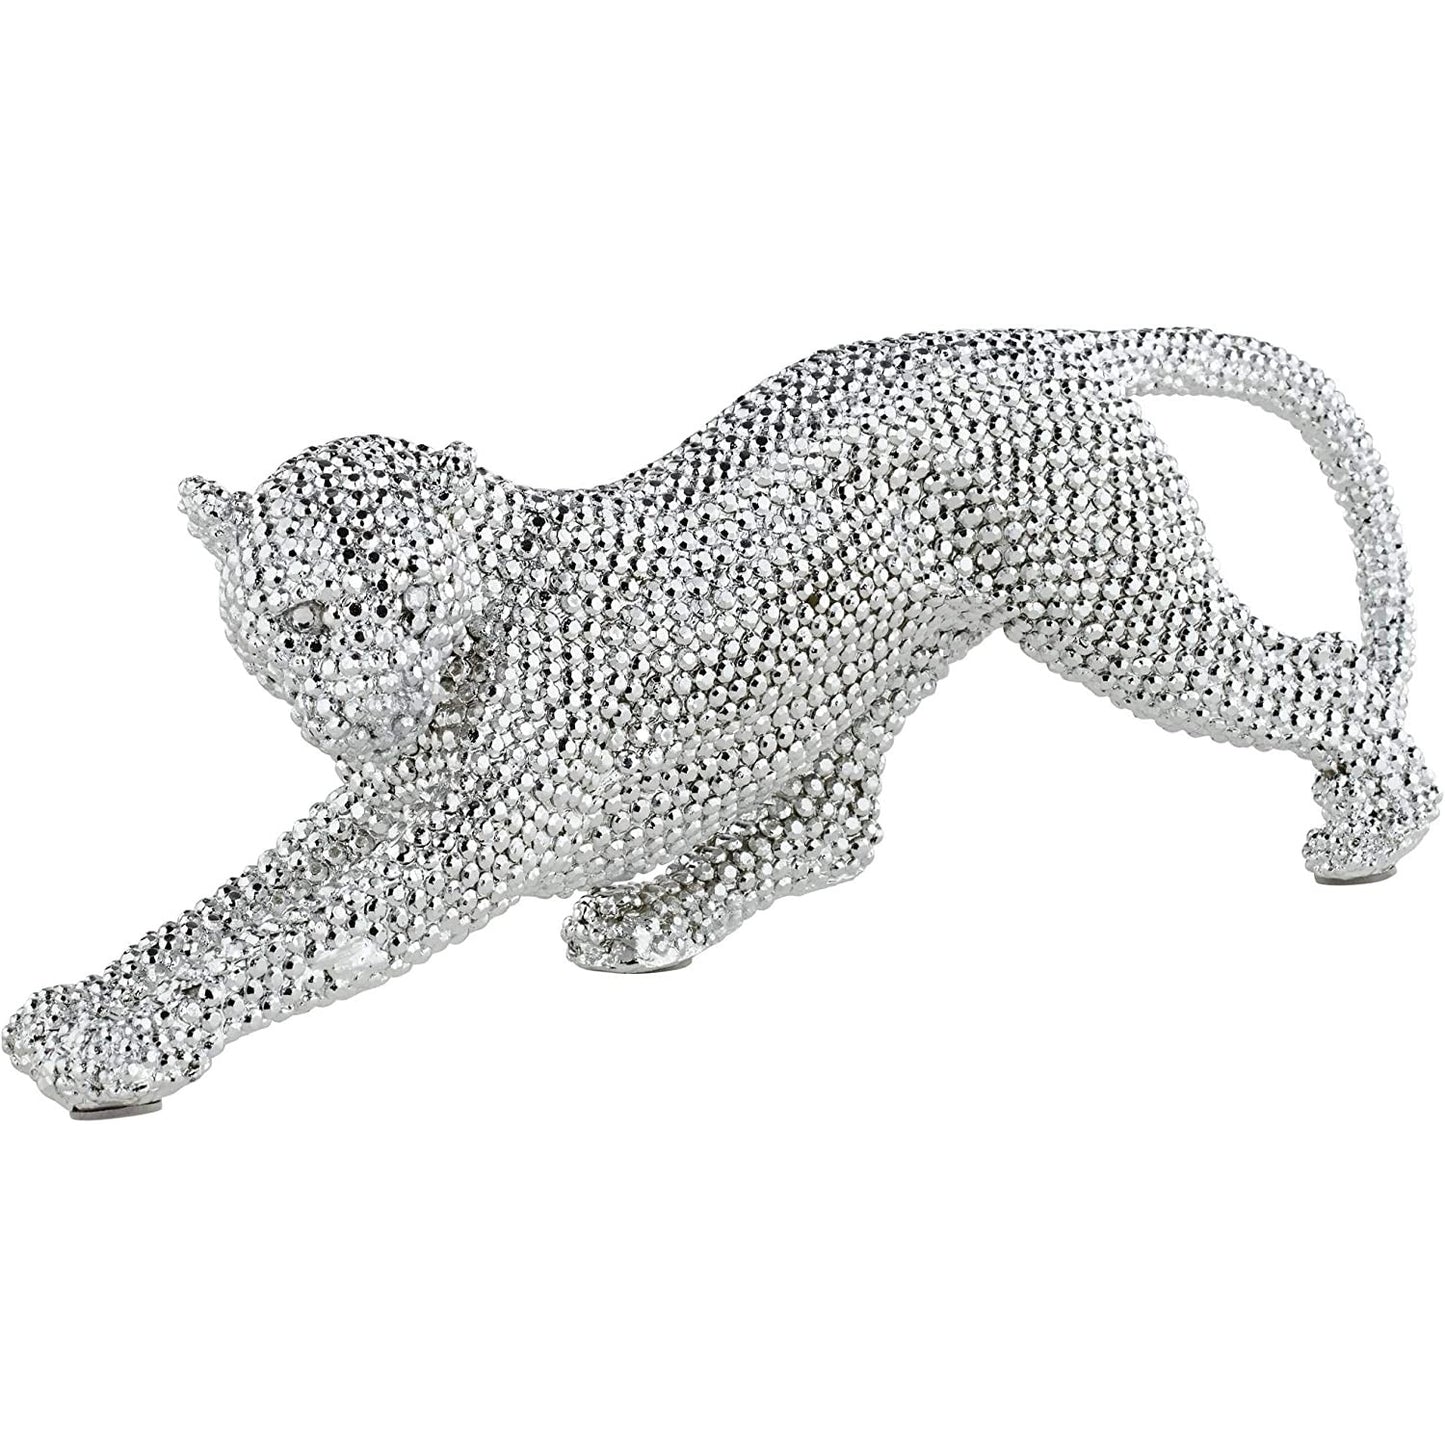 A silver colored decorative leopard in a prowling position.